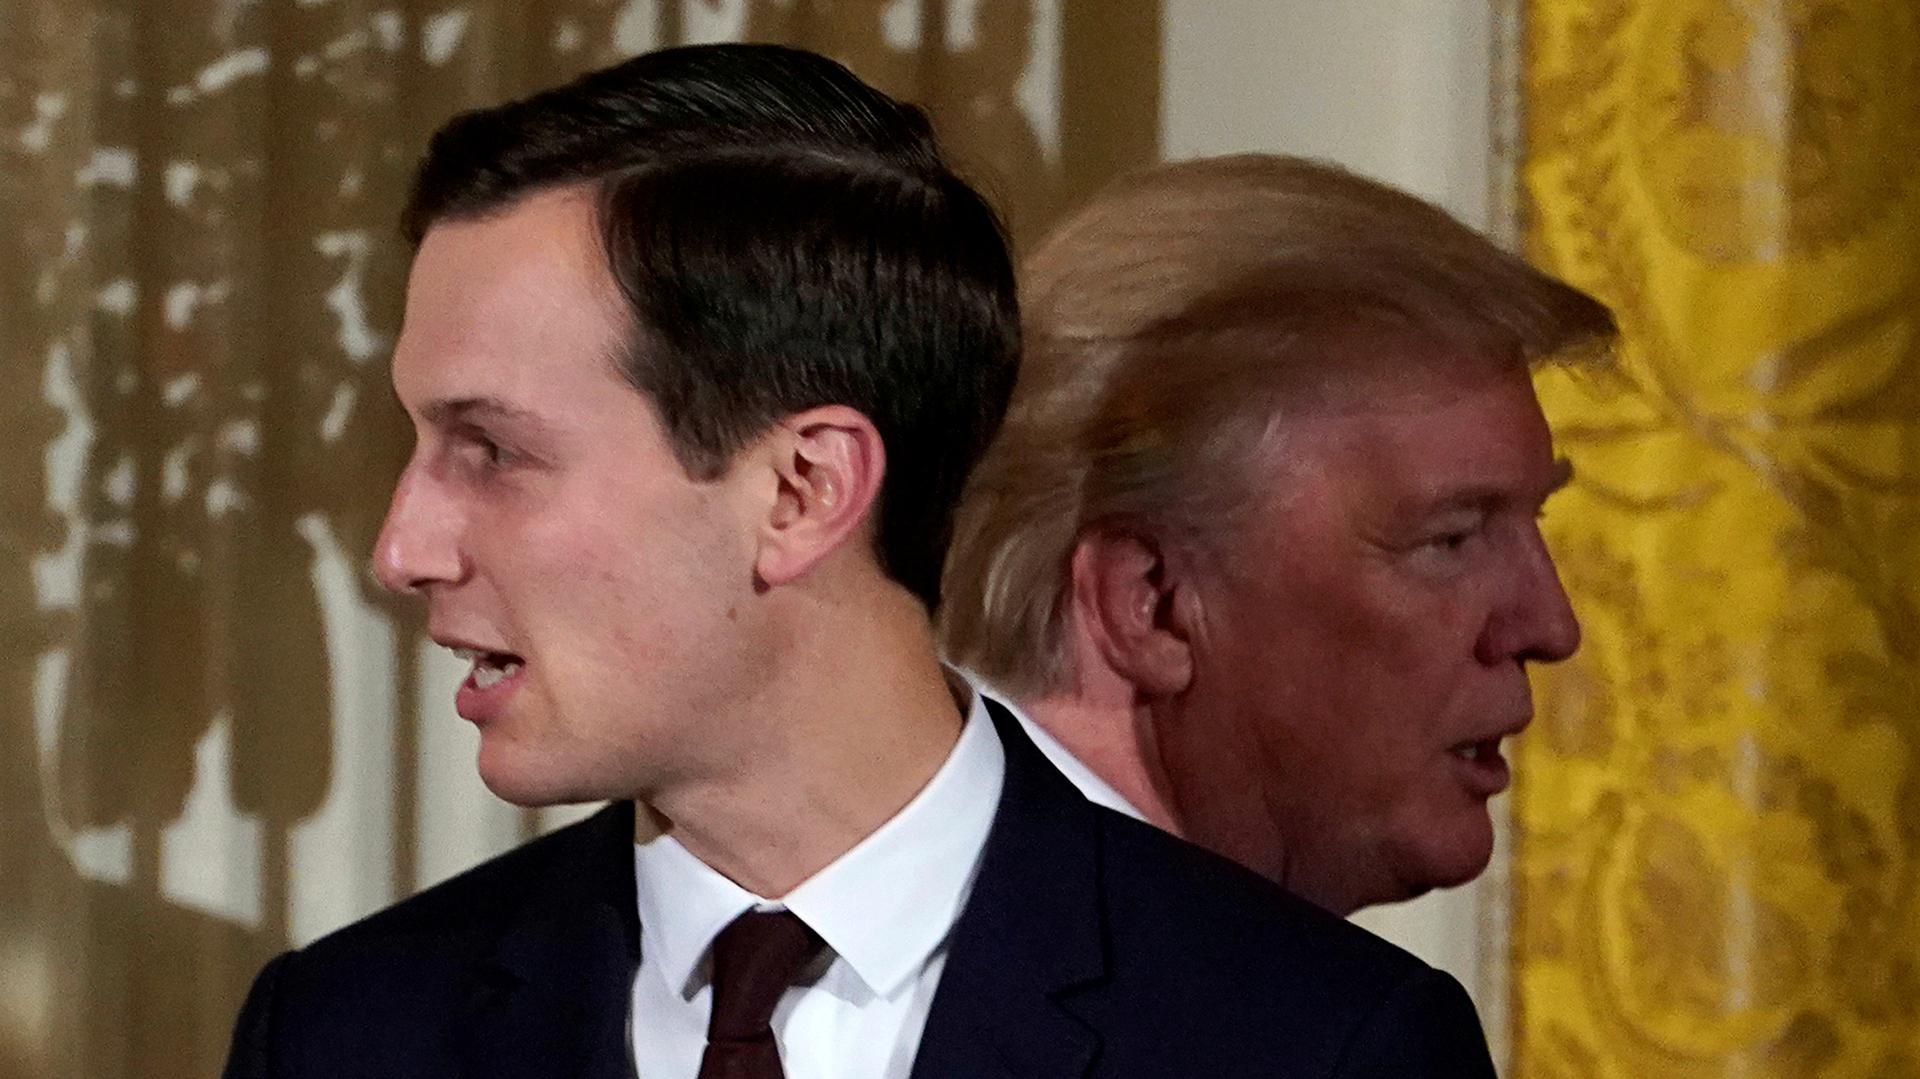 President Donald Trump passes his adviser and son-in-law Jared Kushner at the White House.